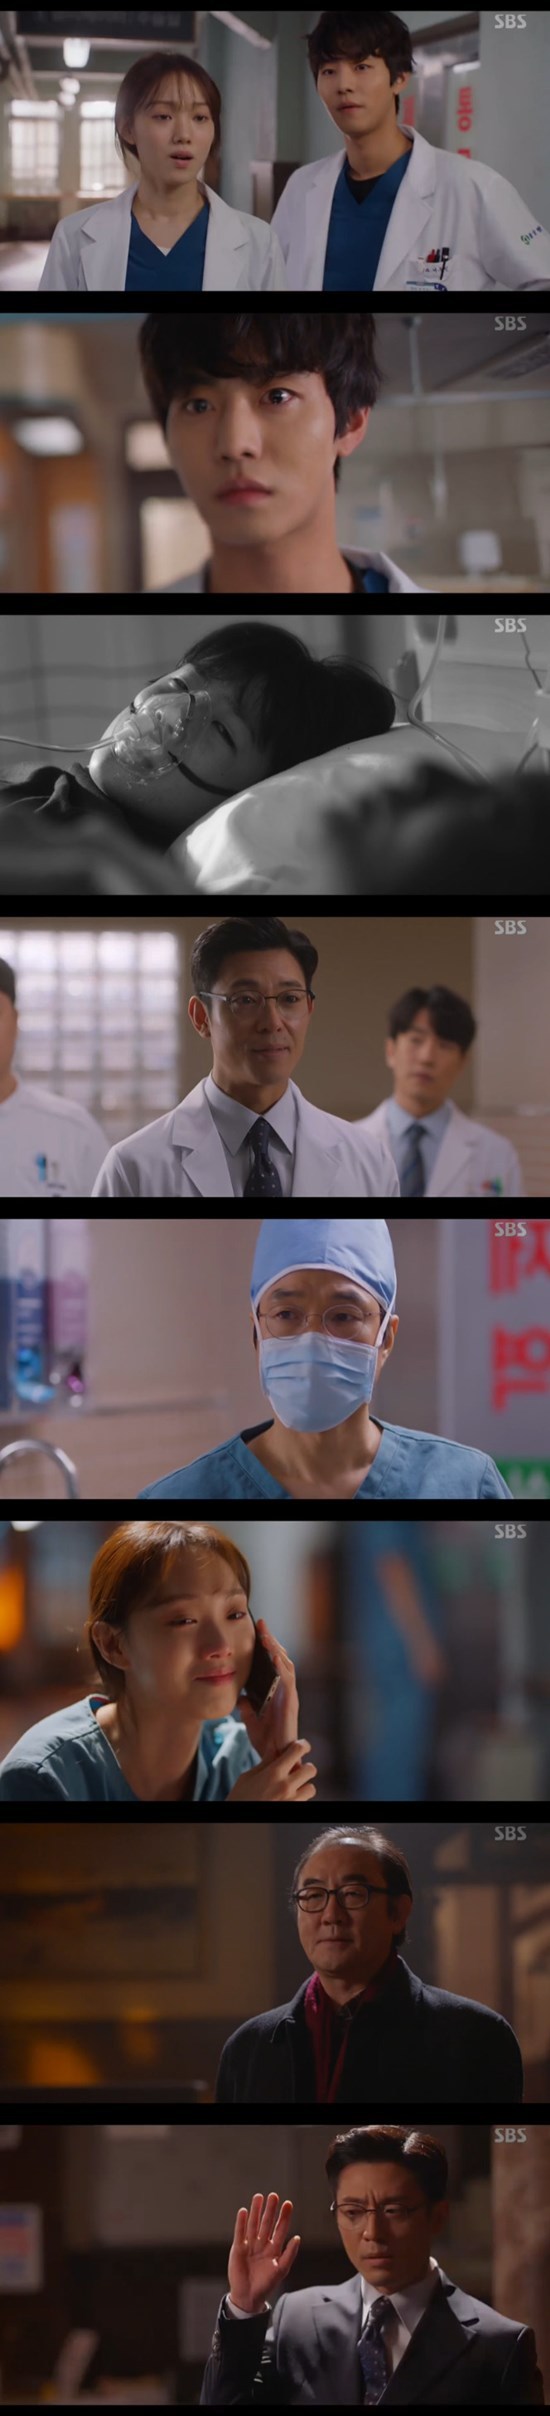 Seoul = = Romantic Doctor Kim Sabu 2 Kim Ju-Hun has been appointed as the director of Doldam Hospital.In the SBS monthly drama Romantic Doctor Kim Sabu 2 (playplayplay by Kang Eun-kyung/directed Yoo In-sik), which was broadcast on the afternoon of the 20th, the image of a mindless stone wall hospital was drawn with heavy patients and surgeries that were passed down like water on Friday.At the same time, Yeo Un-yeong (Kim Hong-Fa) was notified of the dismissal by the board of directors, and the leaders of Doldam Hospital and Kim Sa-bu (Bu Yong-ju, Han Seok-gyu) were worried.Kim Sa-bu said he would go to Do Yun-wan (Choi Jin-ho) to find Yeo Un-yeong, but Yeo Un-yeong said, I came to leave anyway.Park Min-guk (Kim Ju-Hun), who was proposed to be the director of Yeo Un-yeong, visited Doldam Hospital.A family member who attempted to commit suicide in a family member came to Doldam Hospital as a patient. She was struggling with drug addiction.The father, who had attempted suicide and crashed, but managed to save his life, arrived at the hospital. Seo Woo Jin, who took charge of the patient, declared his refusal to treat the patient in a different manner.Even in Kim Sabus rant, Seo Woo Jin stepped out of the emergency room.Seo Woo Jin was confused by his past, which suddenly came to mind with a creditor who came to the hospital.Cha Eun-jae (Lee Sung-kyung) scolded Seo Woo Jin, and Seo Woo Jin consistently kept his cool attitude, saying, When did he worry about Doldam Hospital from Cha Eun-jae?Then Cha Eun-jae told Seo Woo Jin, I can not do it, but you do not do it. Which is worse as a doctor?Kim tried to perform simultaneous surgery on the condition of the emergency patients, but Seo Woo Jin insisted that he could not save his father who tried suicide.Park Eun-tak (Kim Min-jae) advised the appearance of Seo Woo Jin covering the patient. At this time, Cha Eun-jae was worried about taking good medicine for the operation depression that Kim Sa-bu gave.Shim Hye-jin (Park Hyo-joo) declared that he would not help the operation even at the request of Oh Myung-sim (Jin Kyung).Park Min-guk and the staff of the big hospital came to the front of Kim Sa-bu, who was in a hurry to get along. Park Min-guk made a call in front of Kim Sa-bu to accept the proposal of the director of the Doldam Hospital.Cha Eun-jae, who took the medicine given by Kim Sa-bu, ran late and participated in the surgery.To me, that person is still a patient who doesnt want to be treated, and someone said, Its worse than not doing it, its shameful.Cha had finished the operation safely, and she had been talking to her mother in tears of emotion, and at the same time, a call came to Doldam Hospital saying that a gunshot wound was coming.At that moment, Yeo Young-young left and smiled, and Park Min-guk raised his curiosity about the development with a panic in the hospital where the gangsters were disturbed.On the other hand, SBS Romantic Doctor Kim Sabu 2 is a drama depicting the story of real doctor in the background of a poor stone wall hospital in the province. It is broadcast every Monday and Tuesday at 9:40 pm.